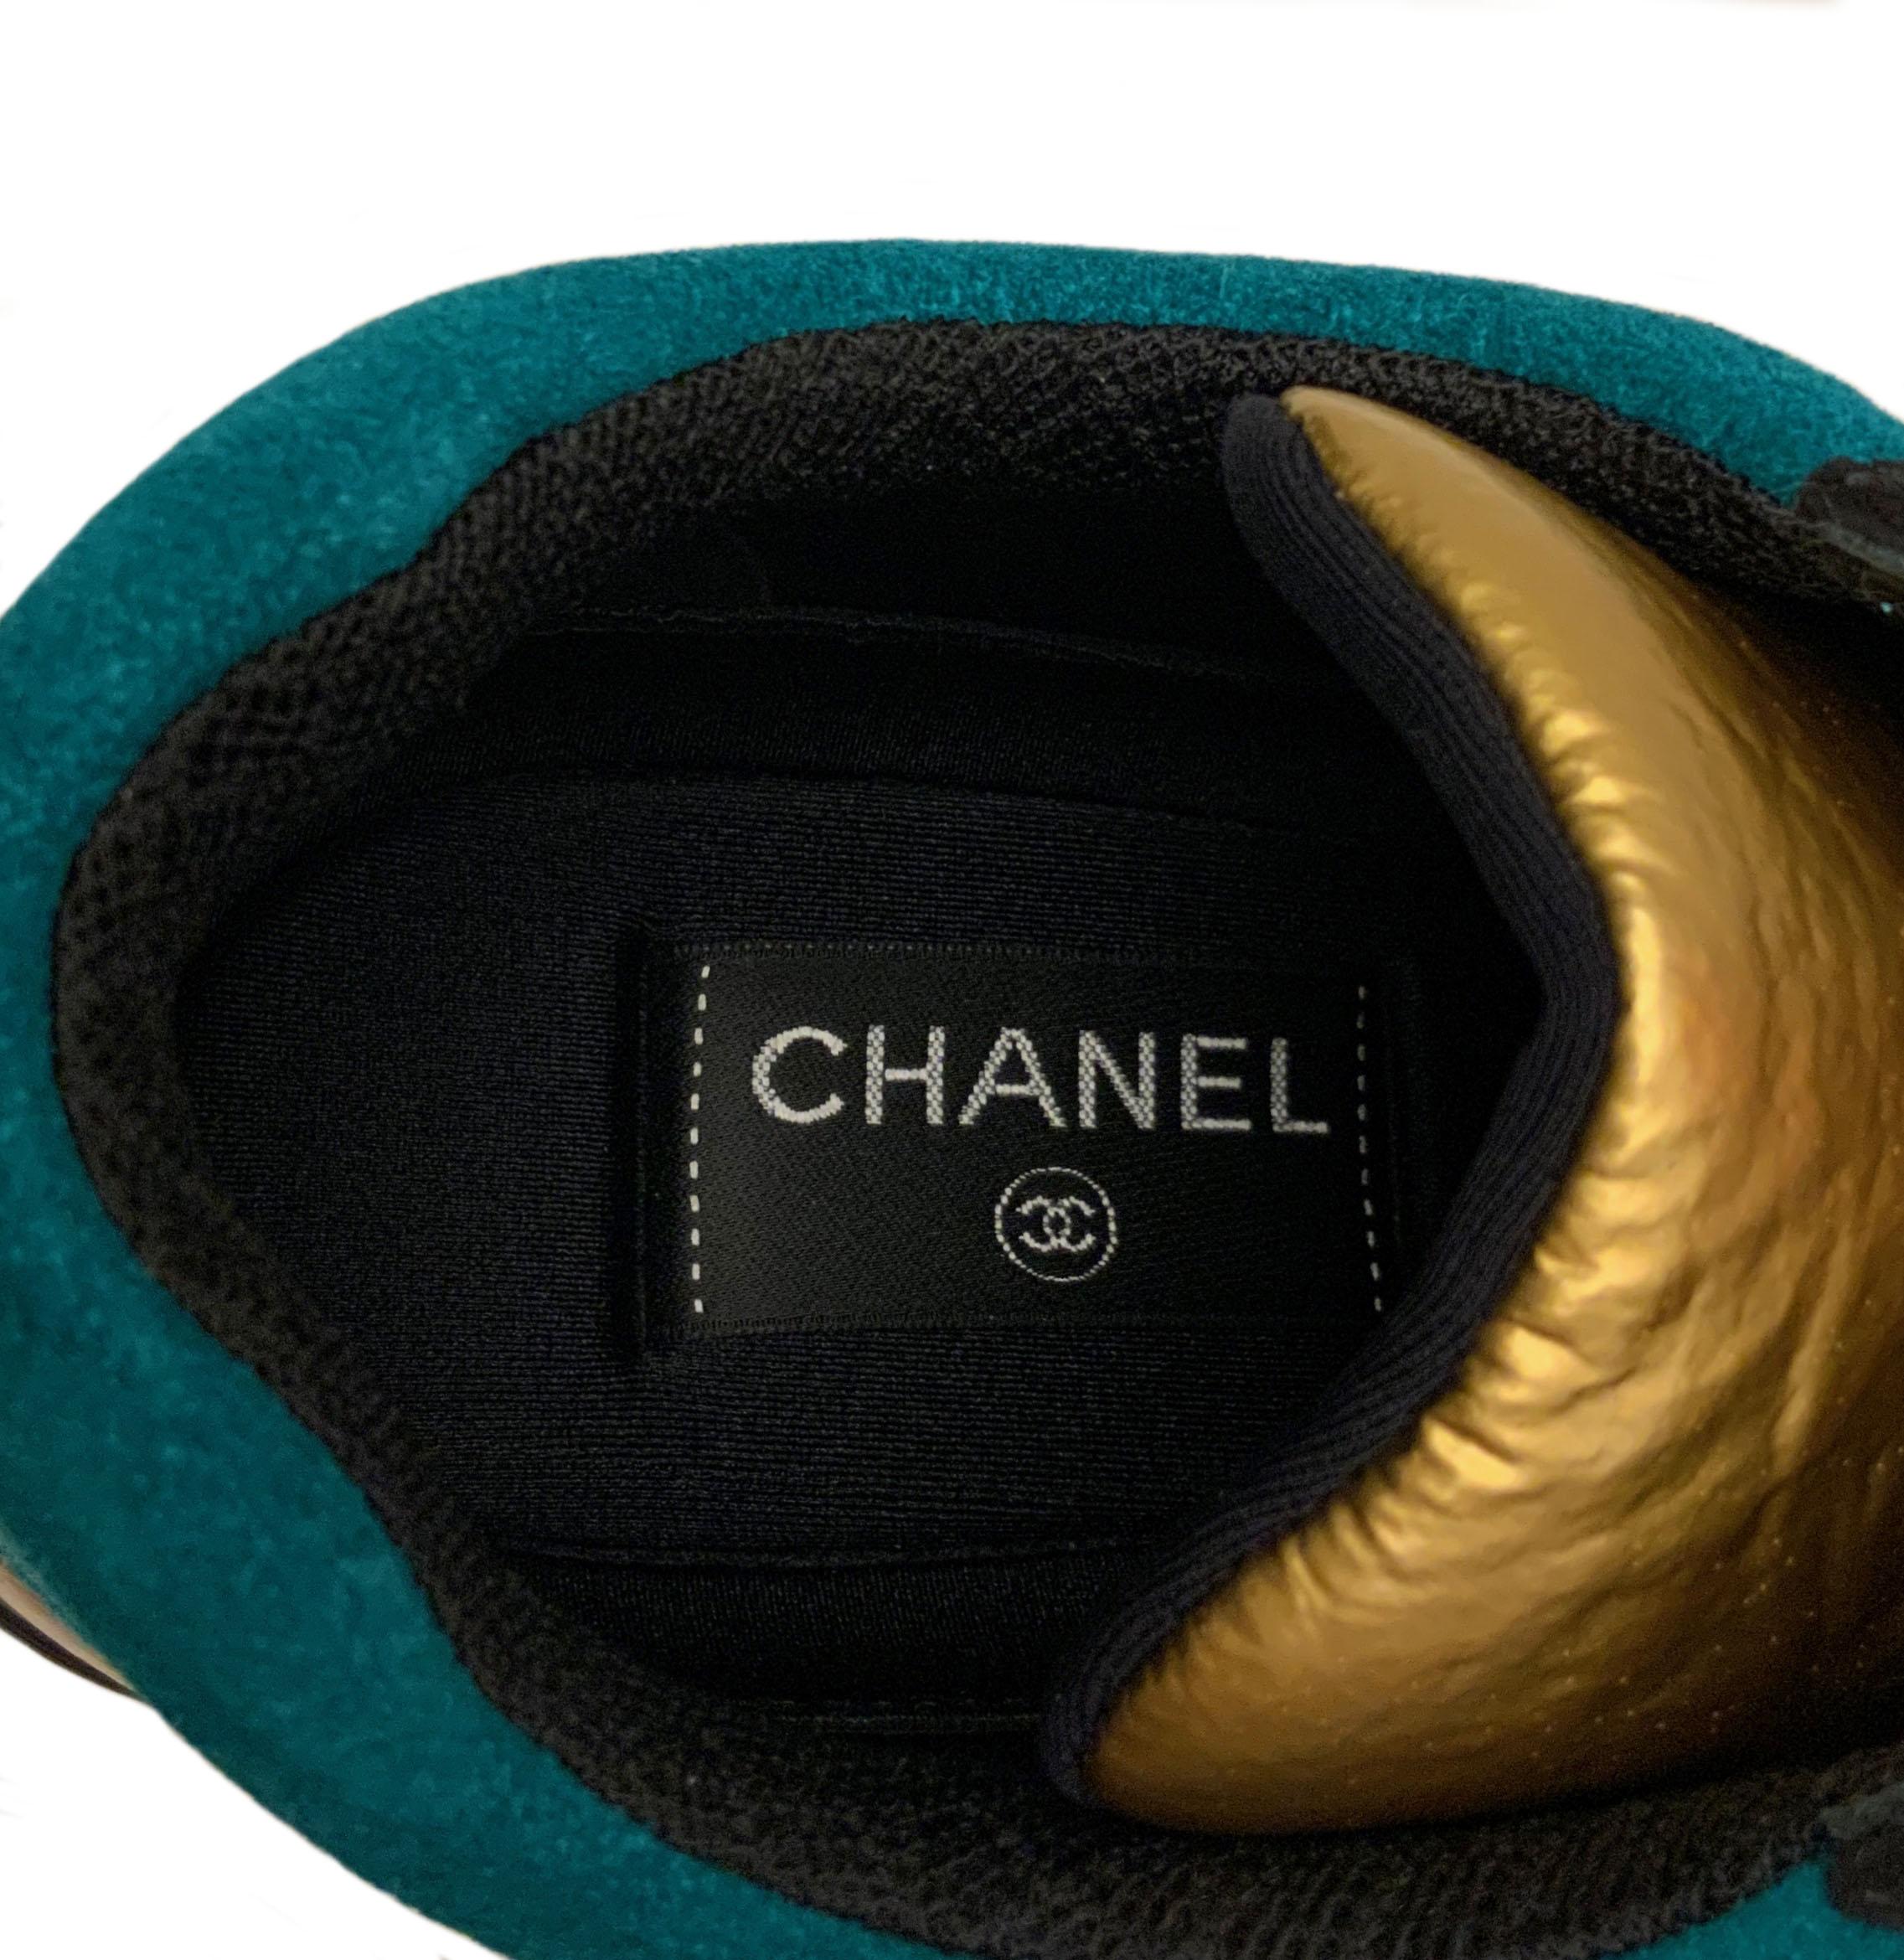 Women's or Men's Chanel Métiers d'Art 2018/2019 Paris New-York Suede and Gold Fabric Sneakers